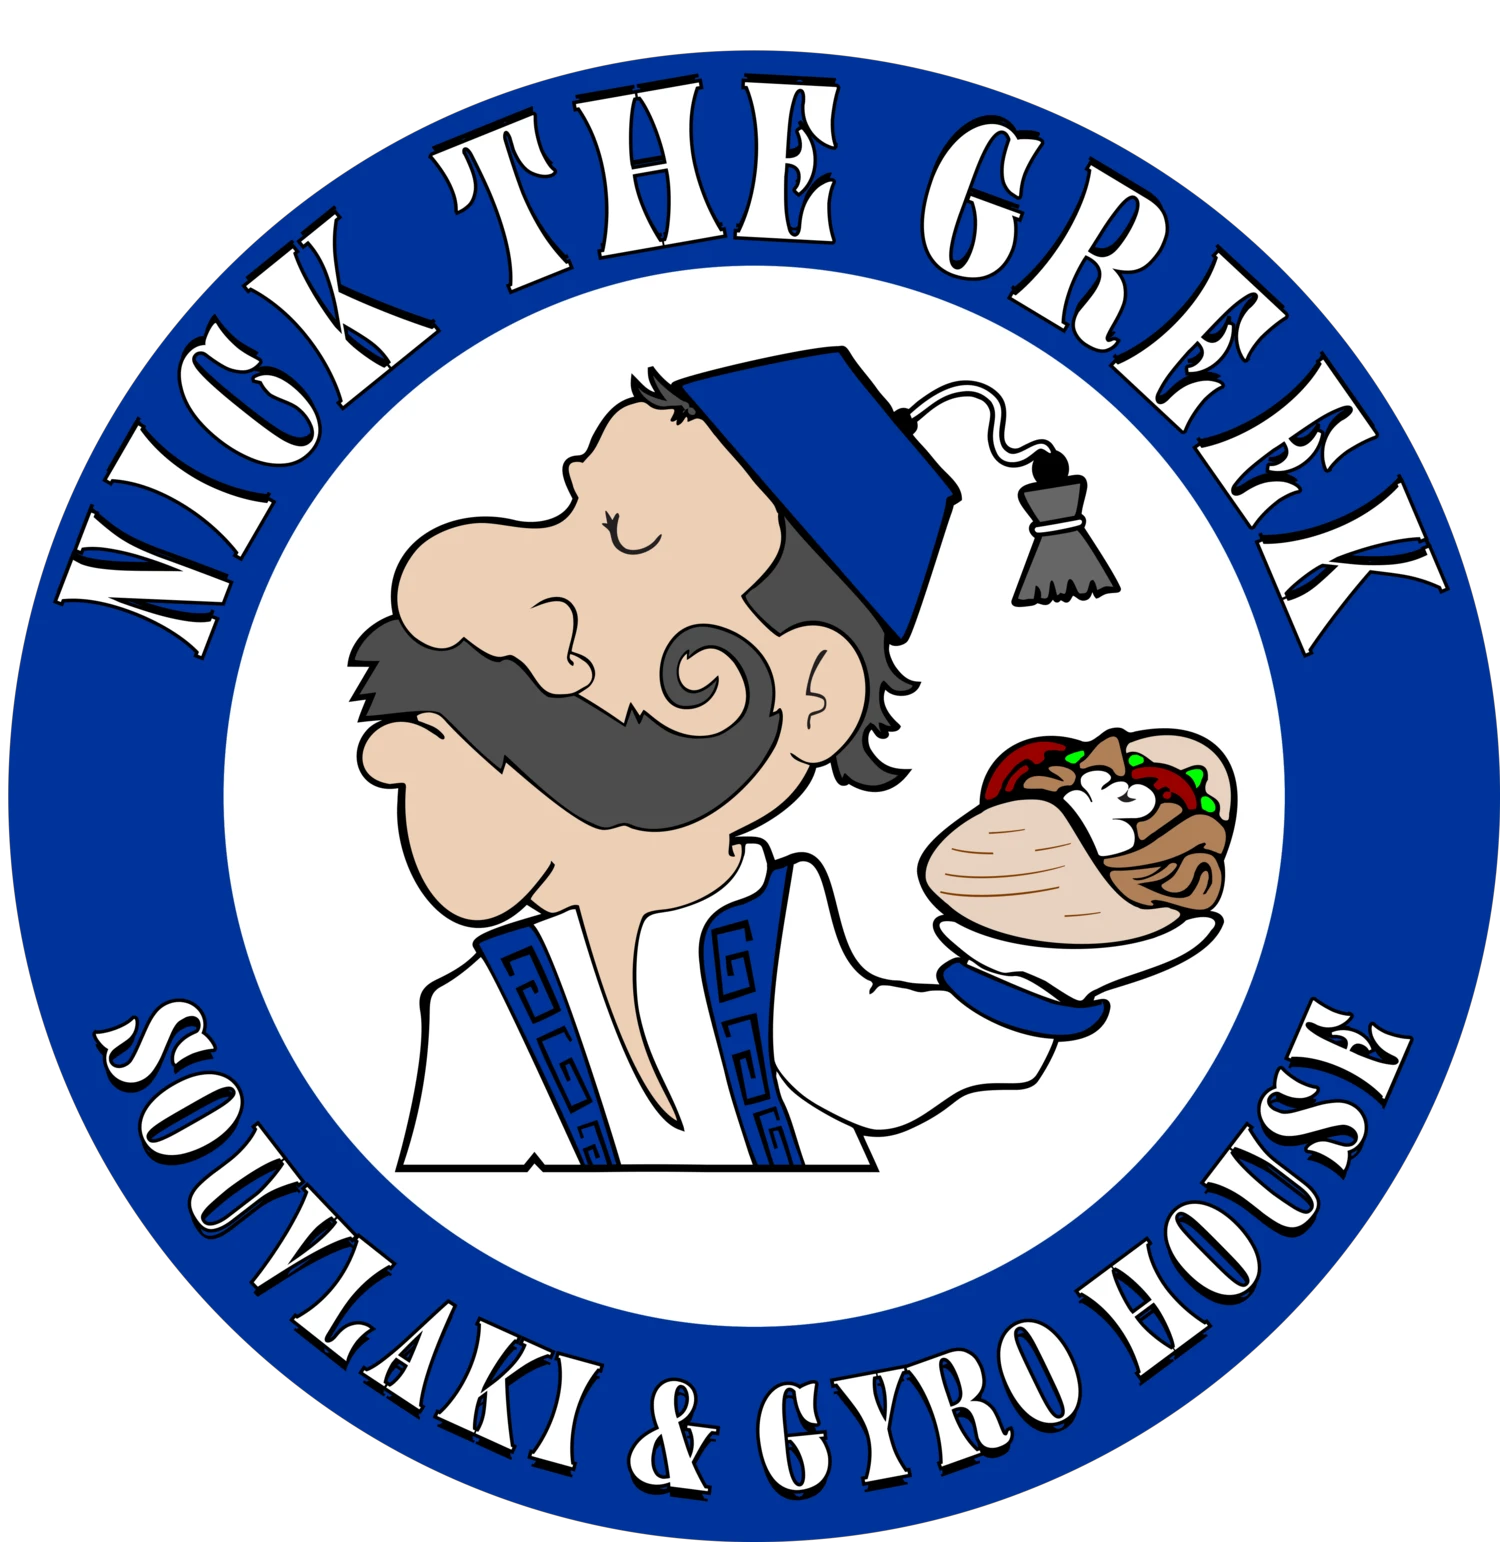 Find 25% Reduction At Nick The Greek